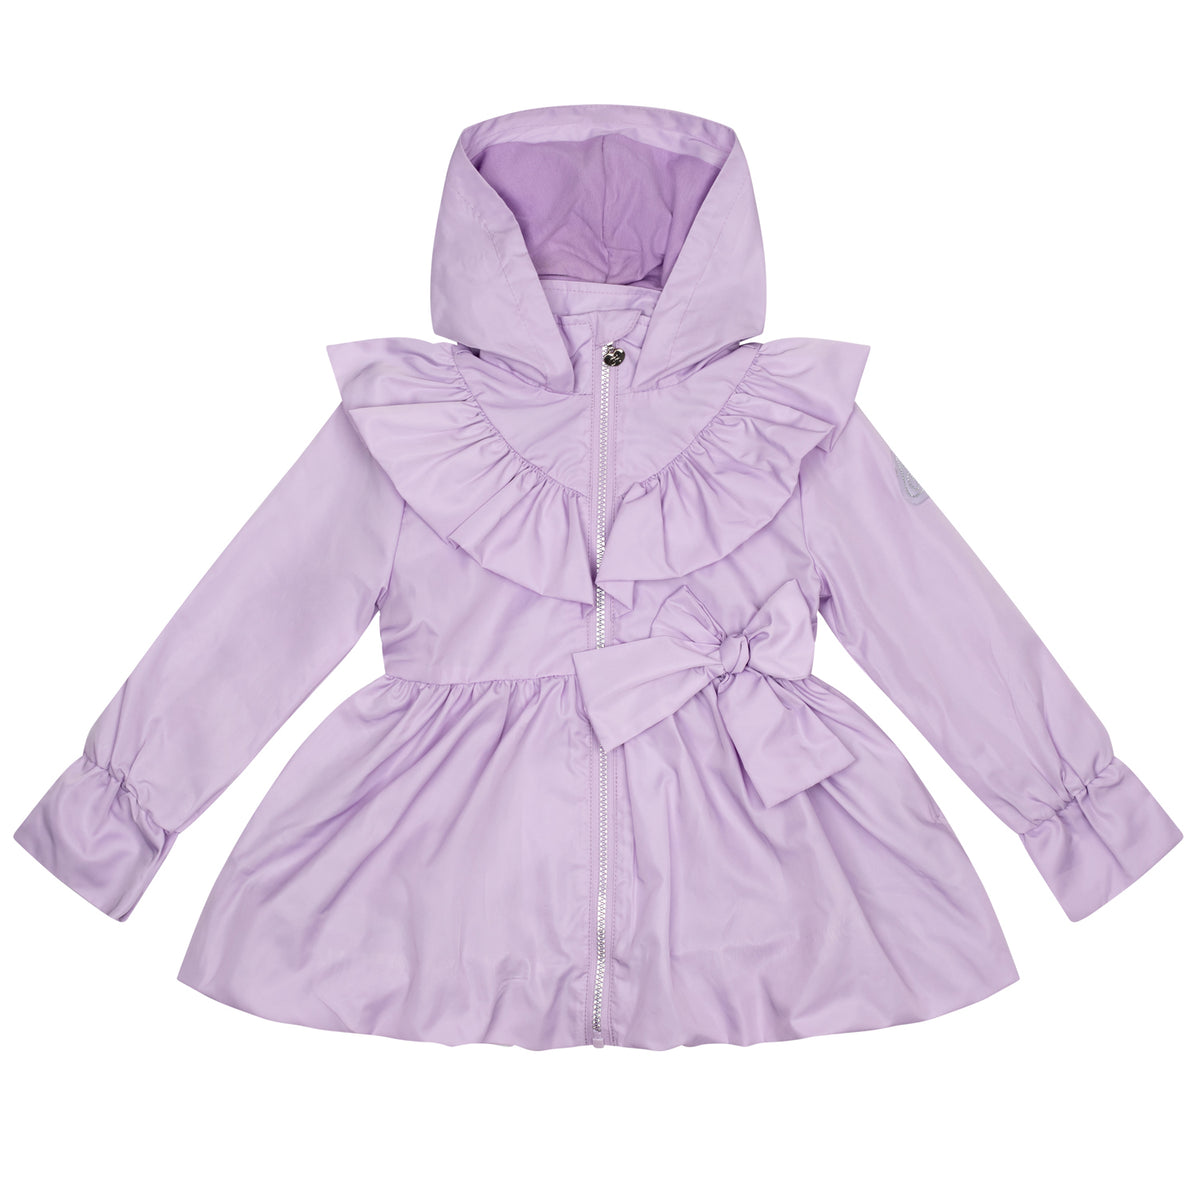 A Dee Girls 'Natalie' Lilac Frill & Bow Jacket